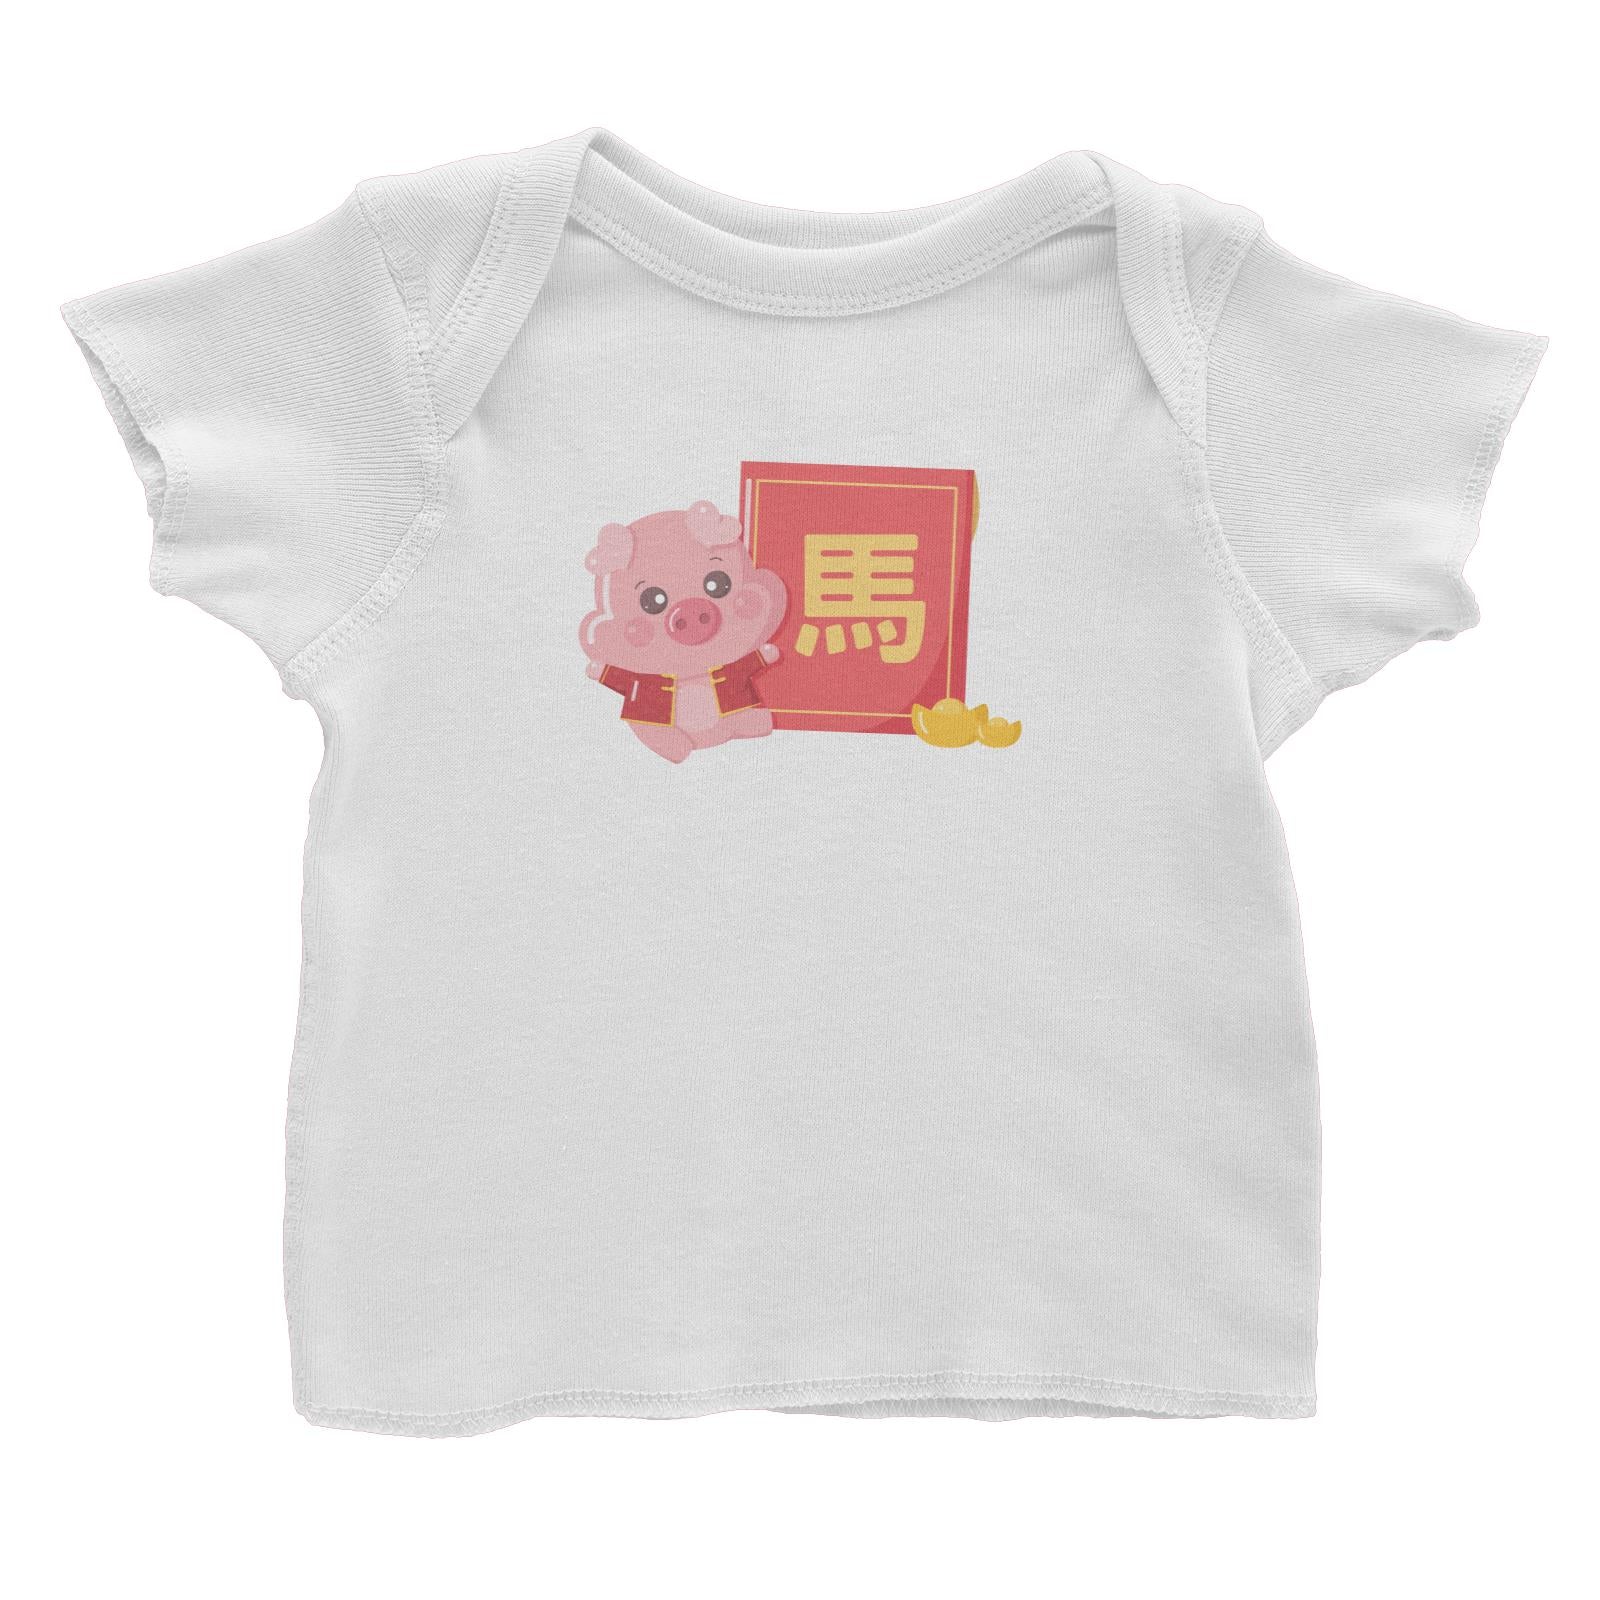 Chinese New Year Cute Pig Angpau Boy With Addname Baby T-Shirt